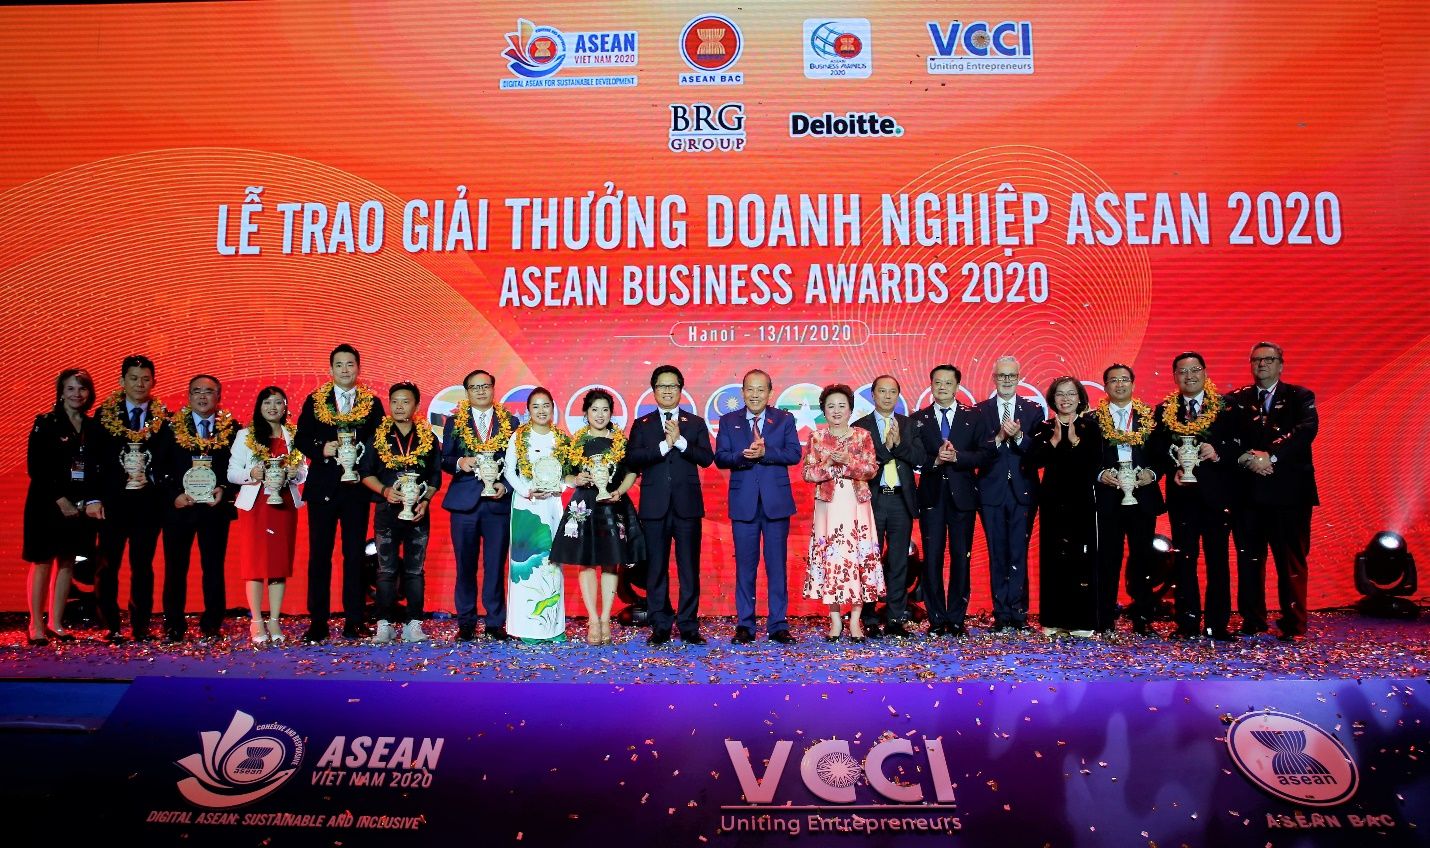 Representatives of enterprises and entrepreneurs taking a photo with Vietnam’s Permanent Deputy Prime Minister Truong Hoa Binh and leaders of the VCCI, the ASEAN BAC 2020, the ABA 2020 at the event.